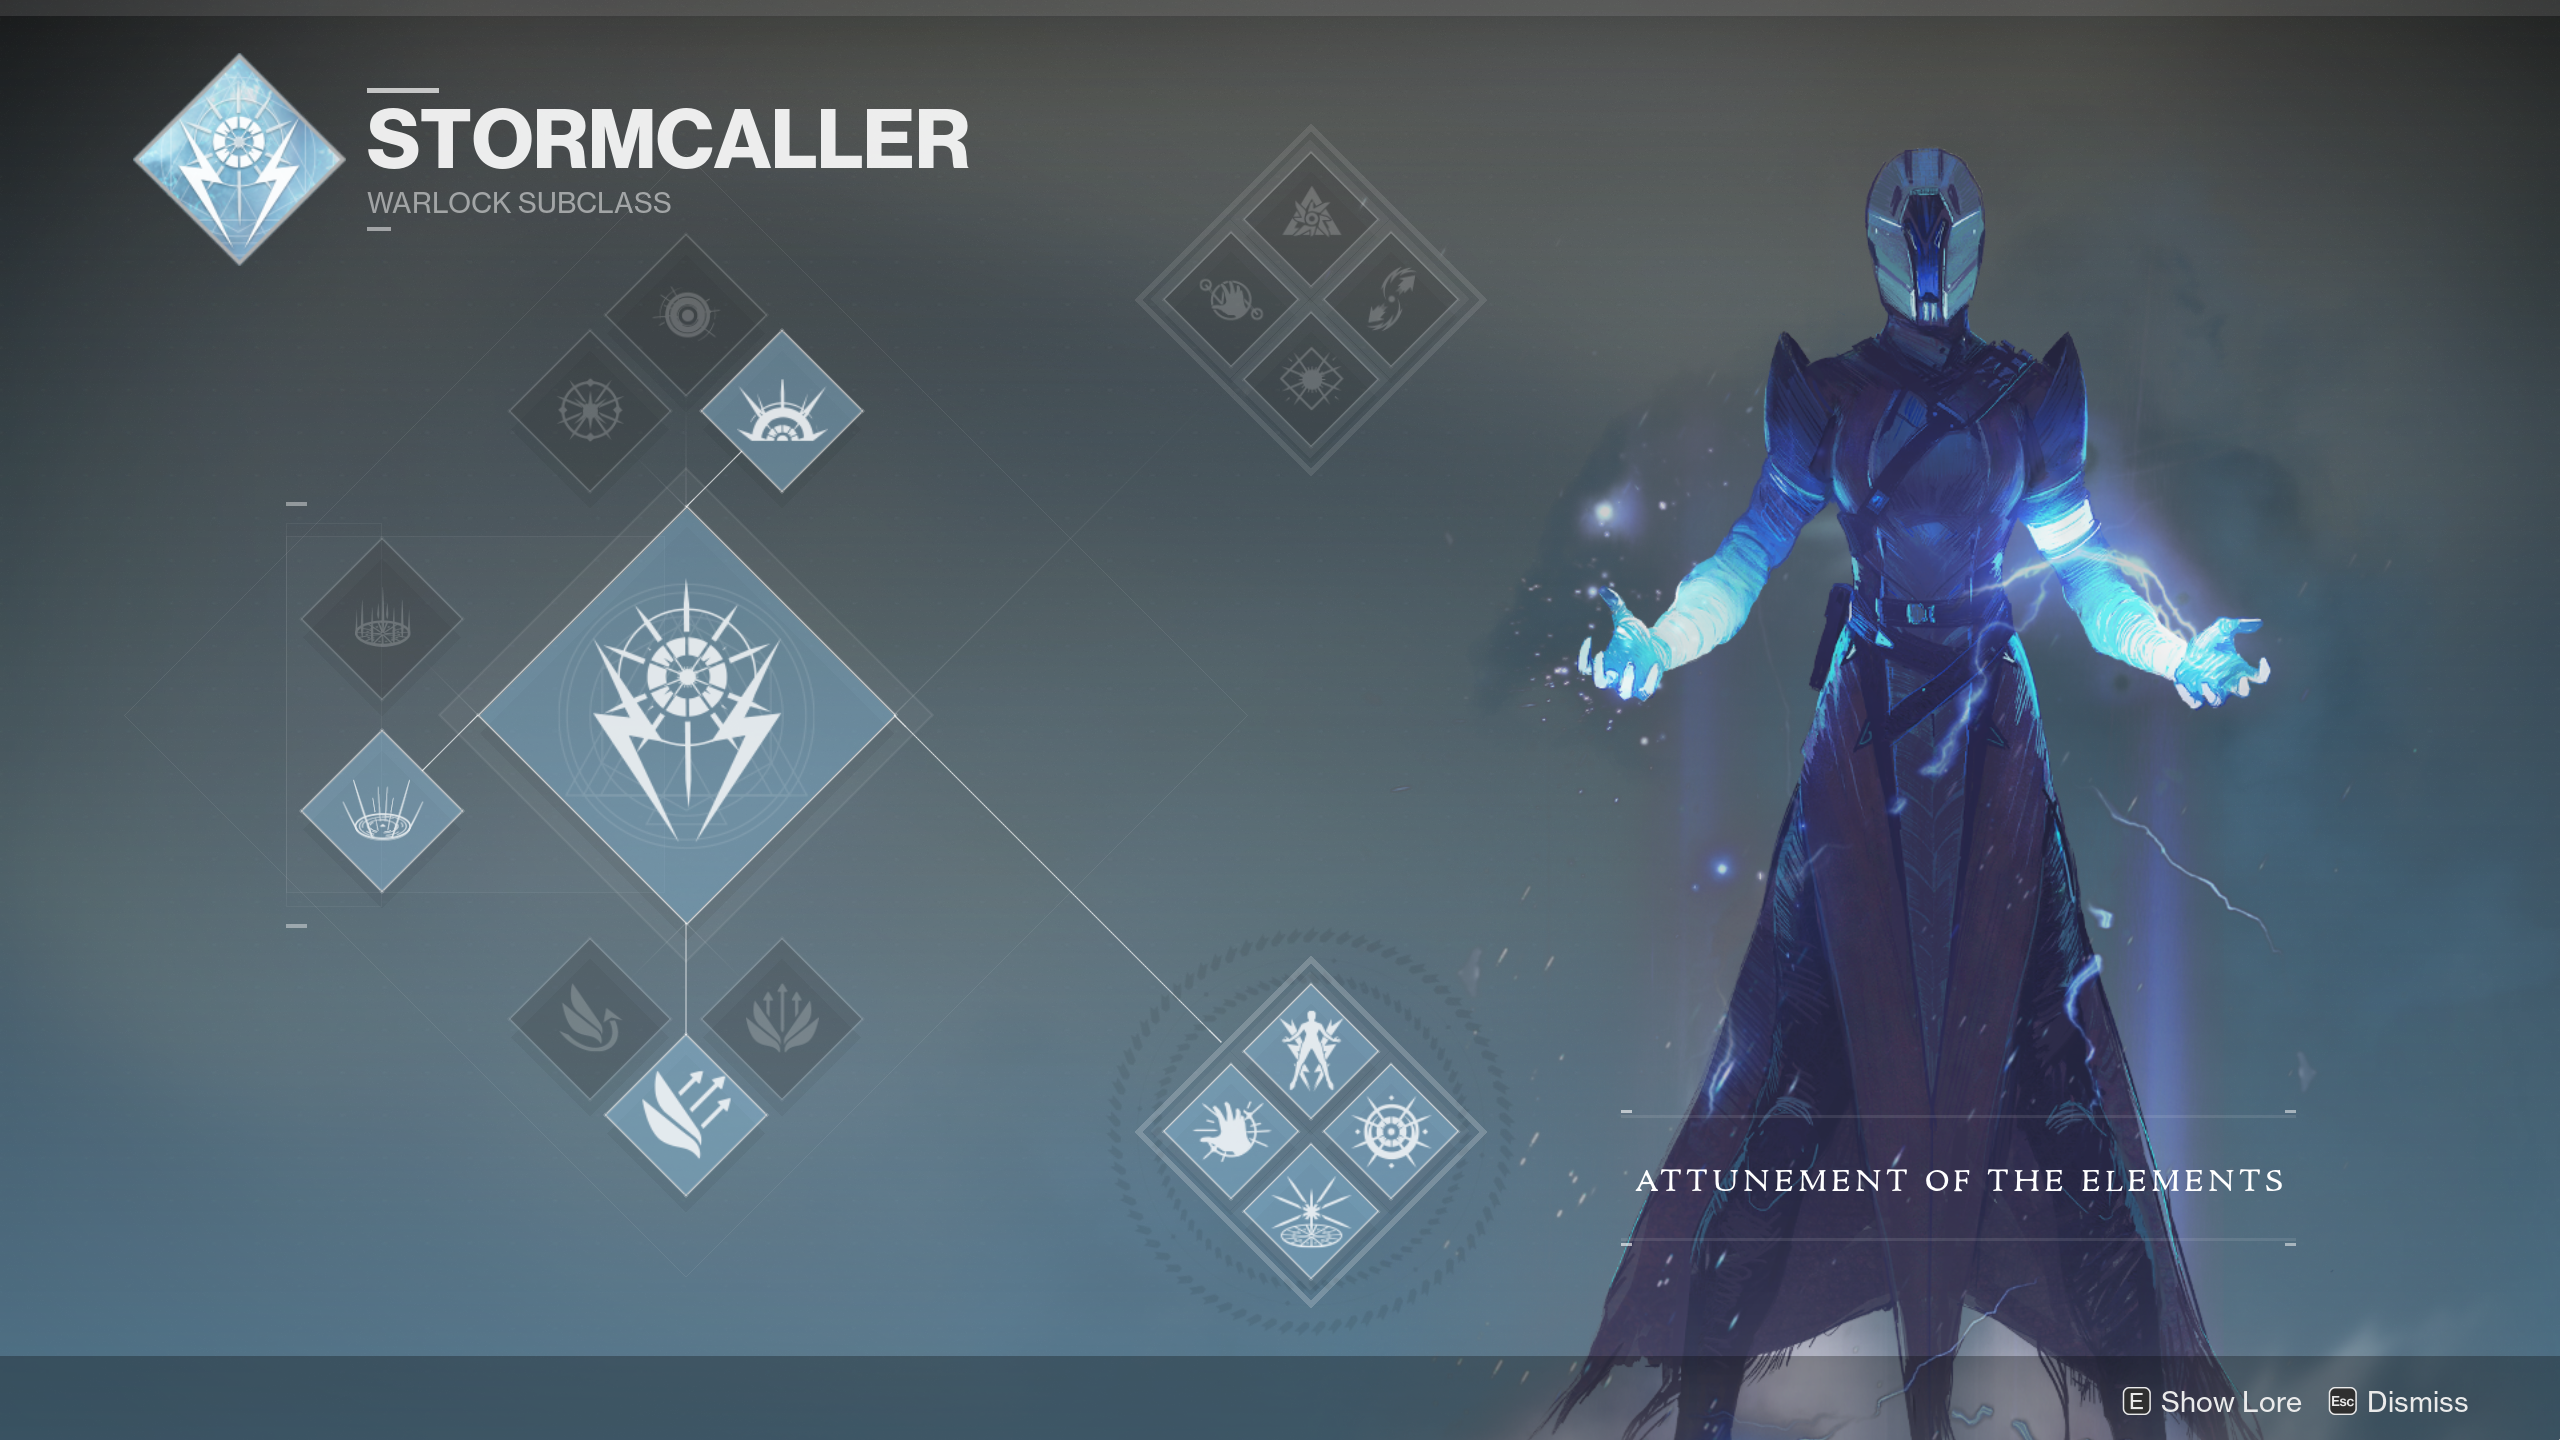 Destiny 2 classes your full guide to all the subclasses, abilities